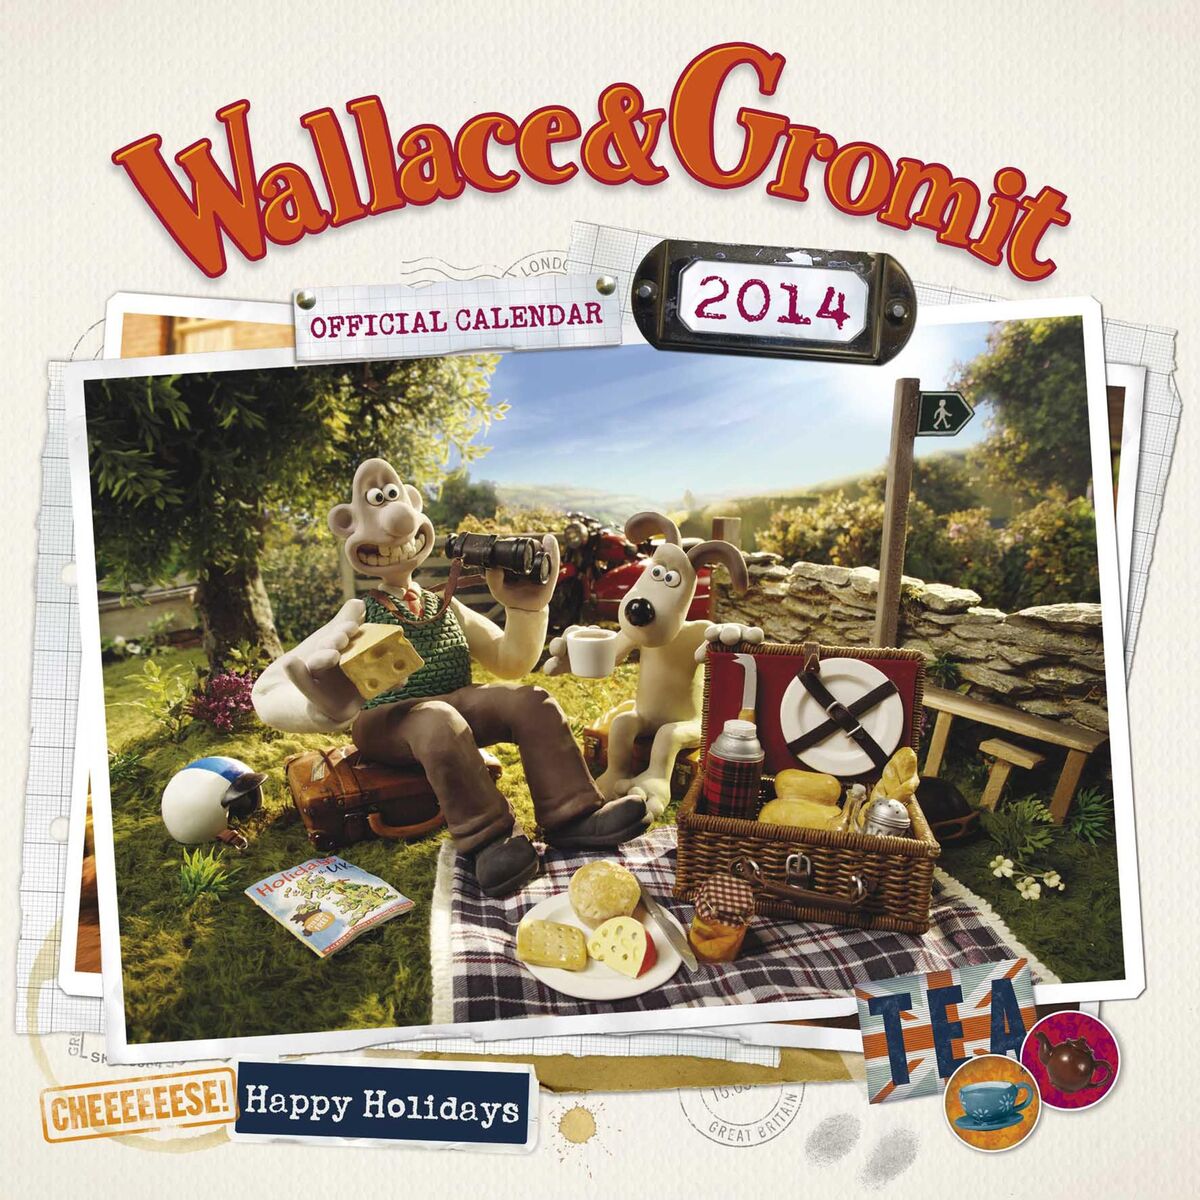 wallace-gromit-the-official-2014-calendar-wallace-and-gromit-wiki-fandom